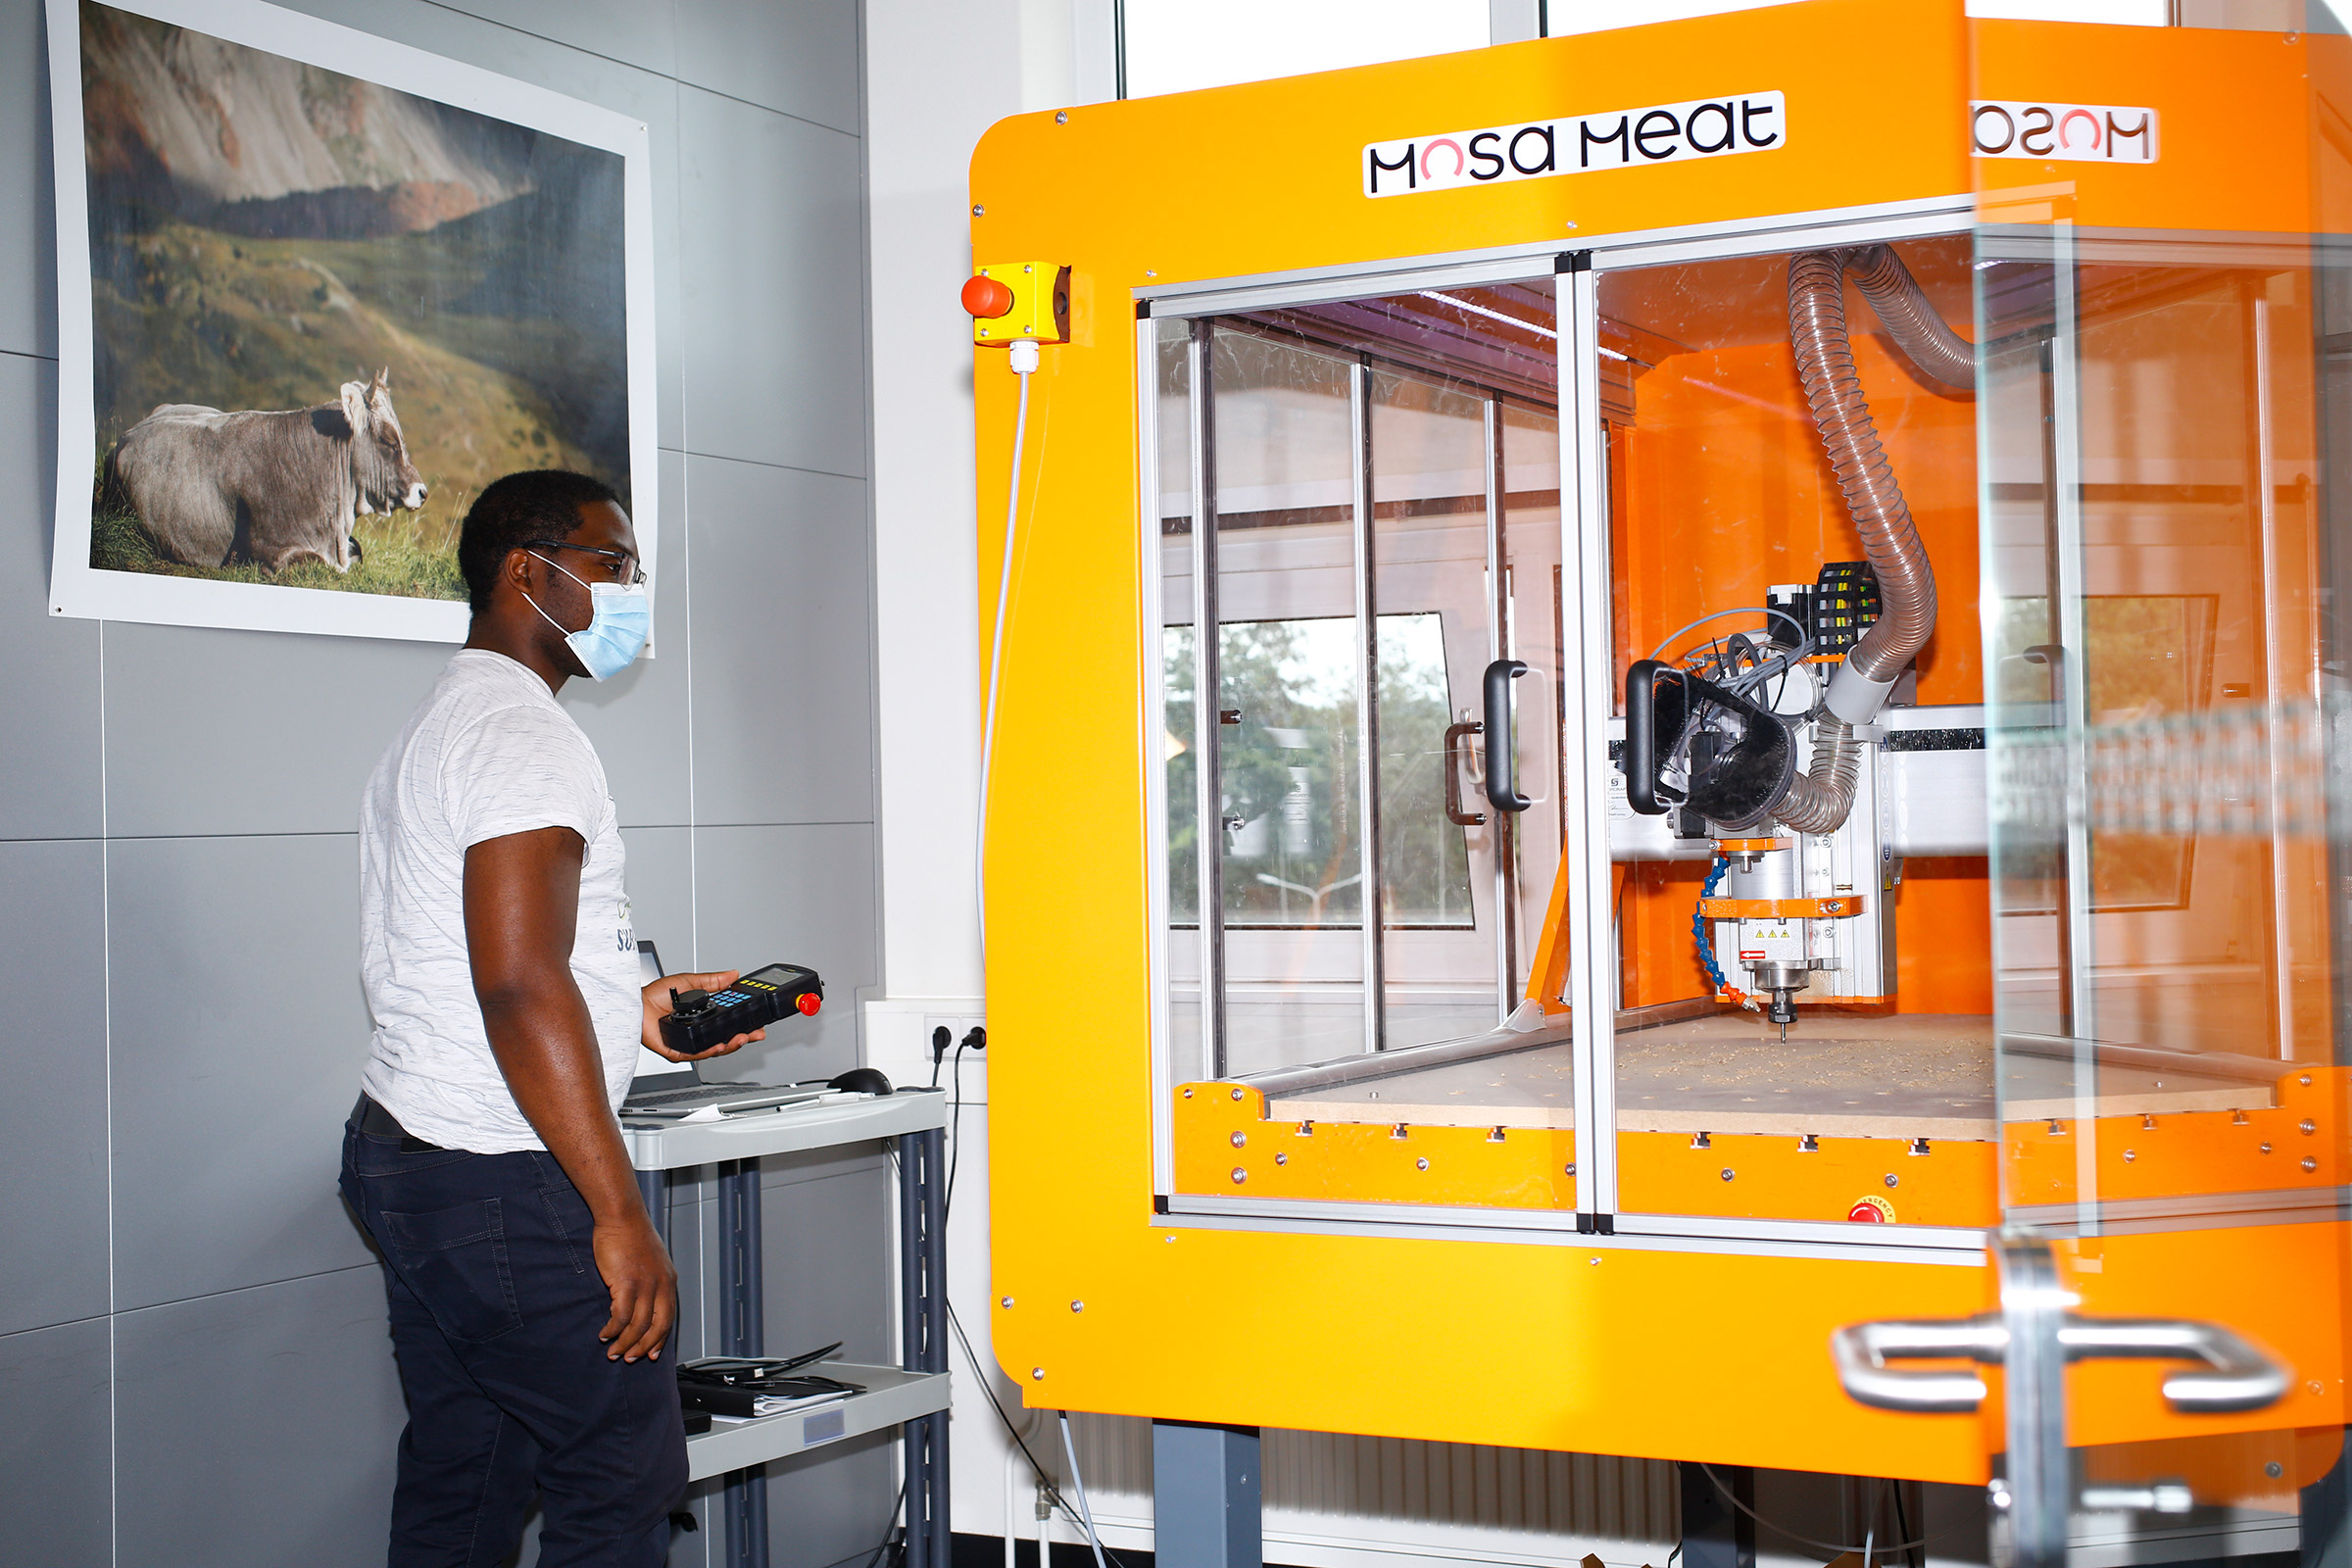 Josias Mouafo stands in front of a CNC (computer numerical control) machine which makes custom made parts for Mosa's processes. (Ricardo Cases for TIME)